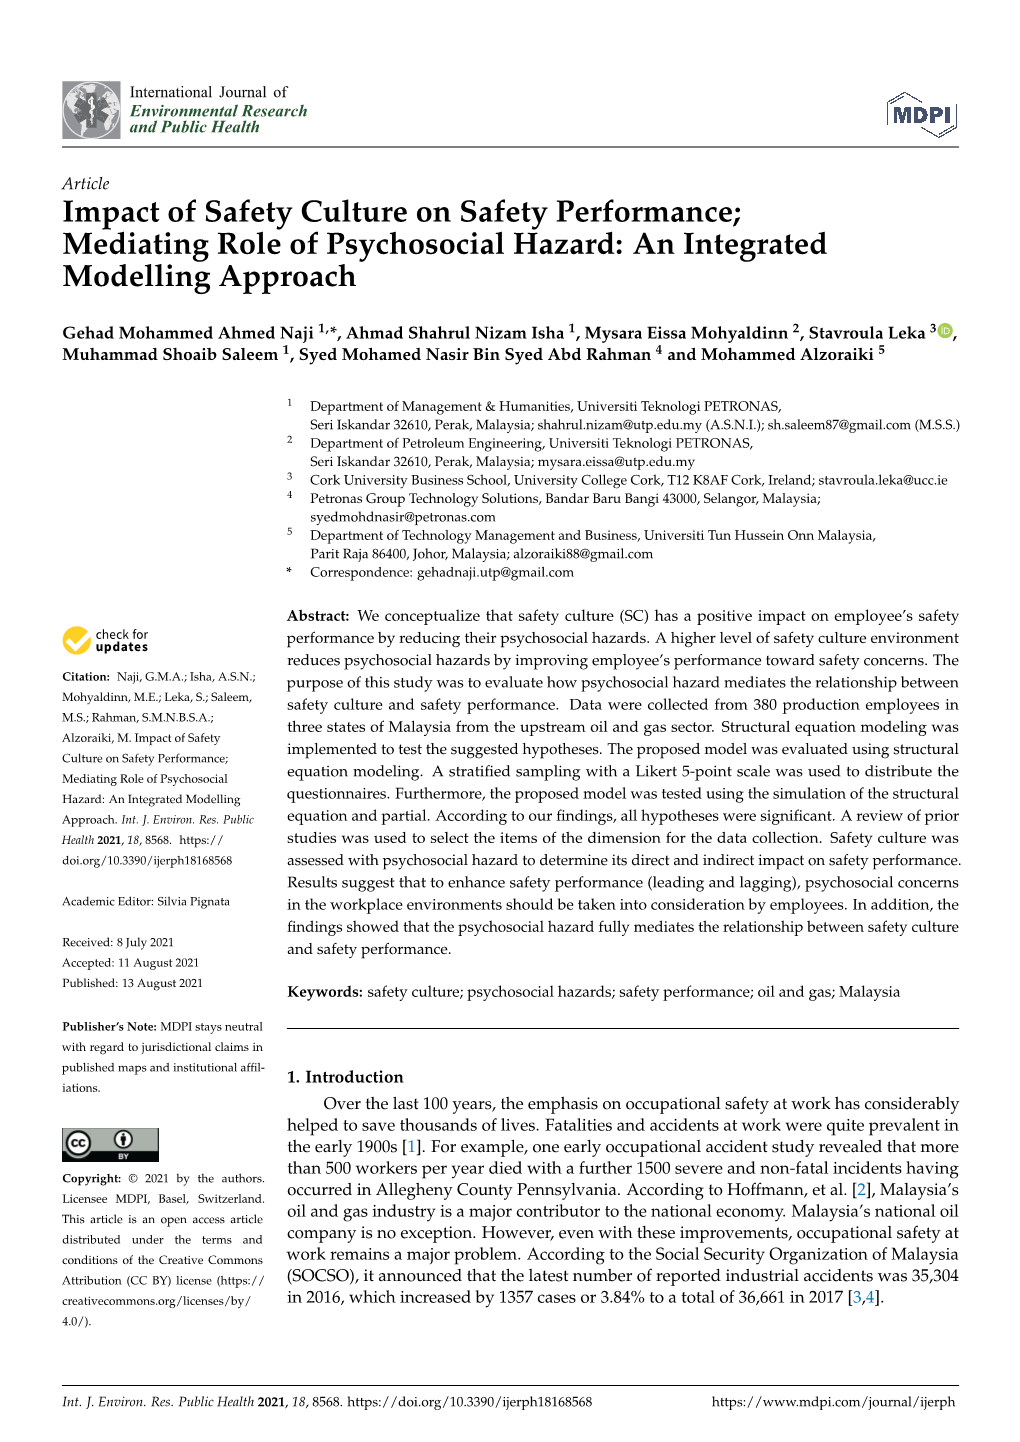 Mediating Role of Psychosocial Hazard: an Integrated Modelling Approach